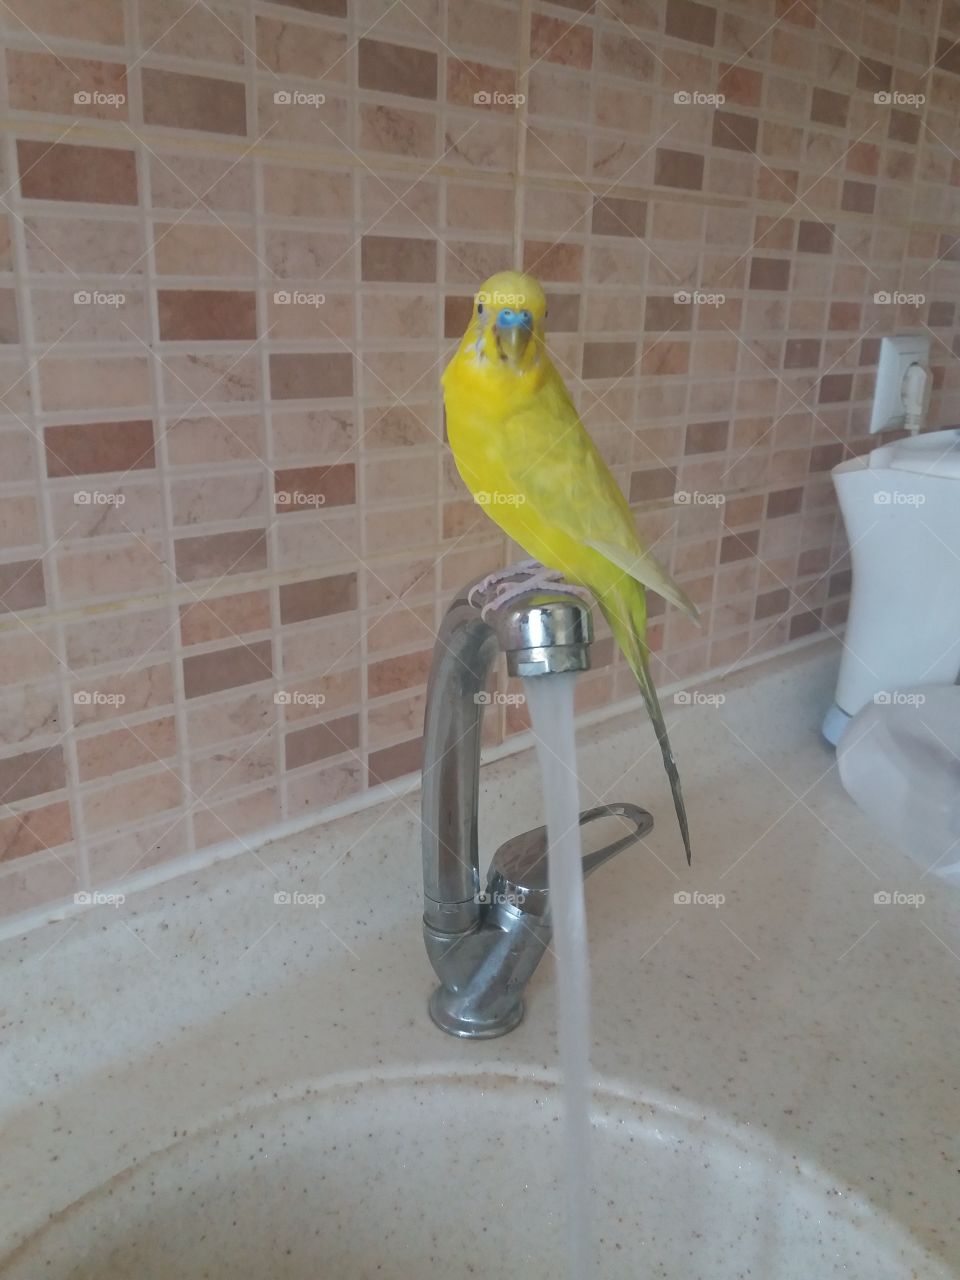 the kings of the  birds. its name is yellow.before it has a shower